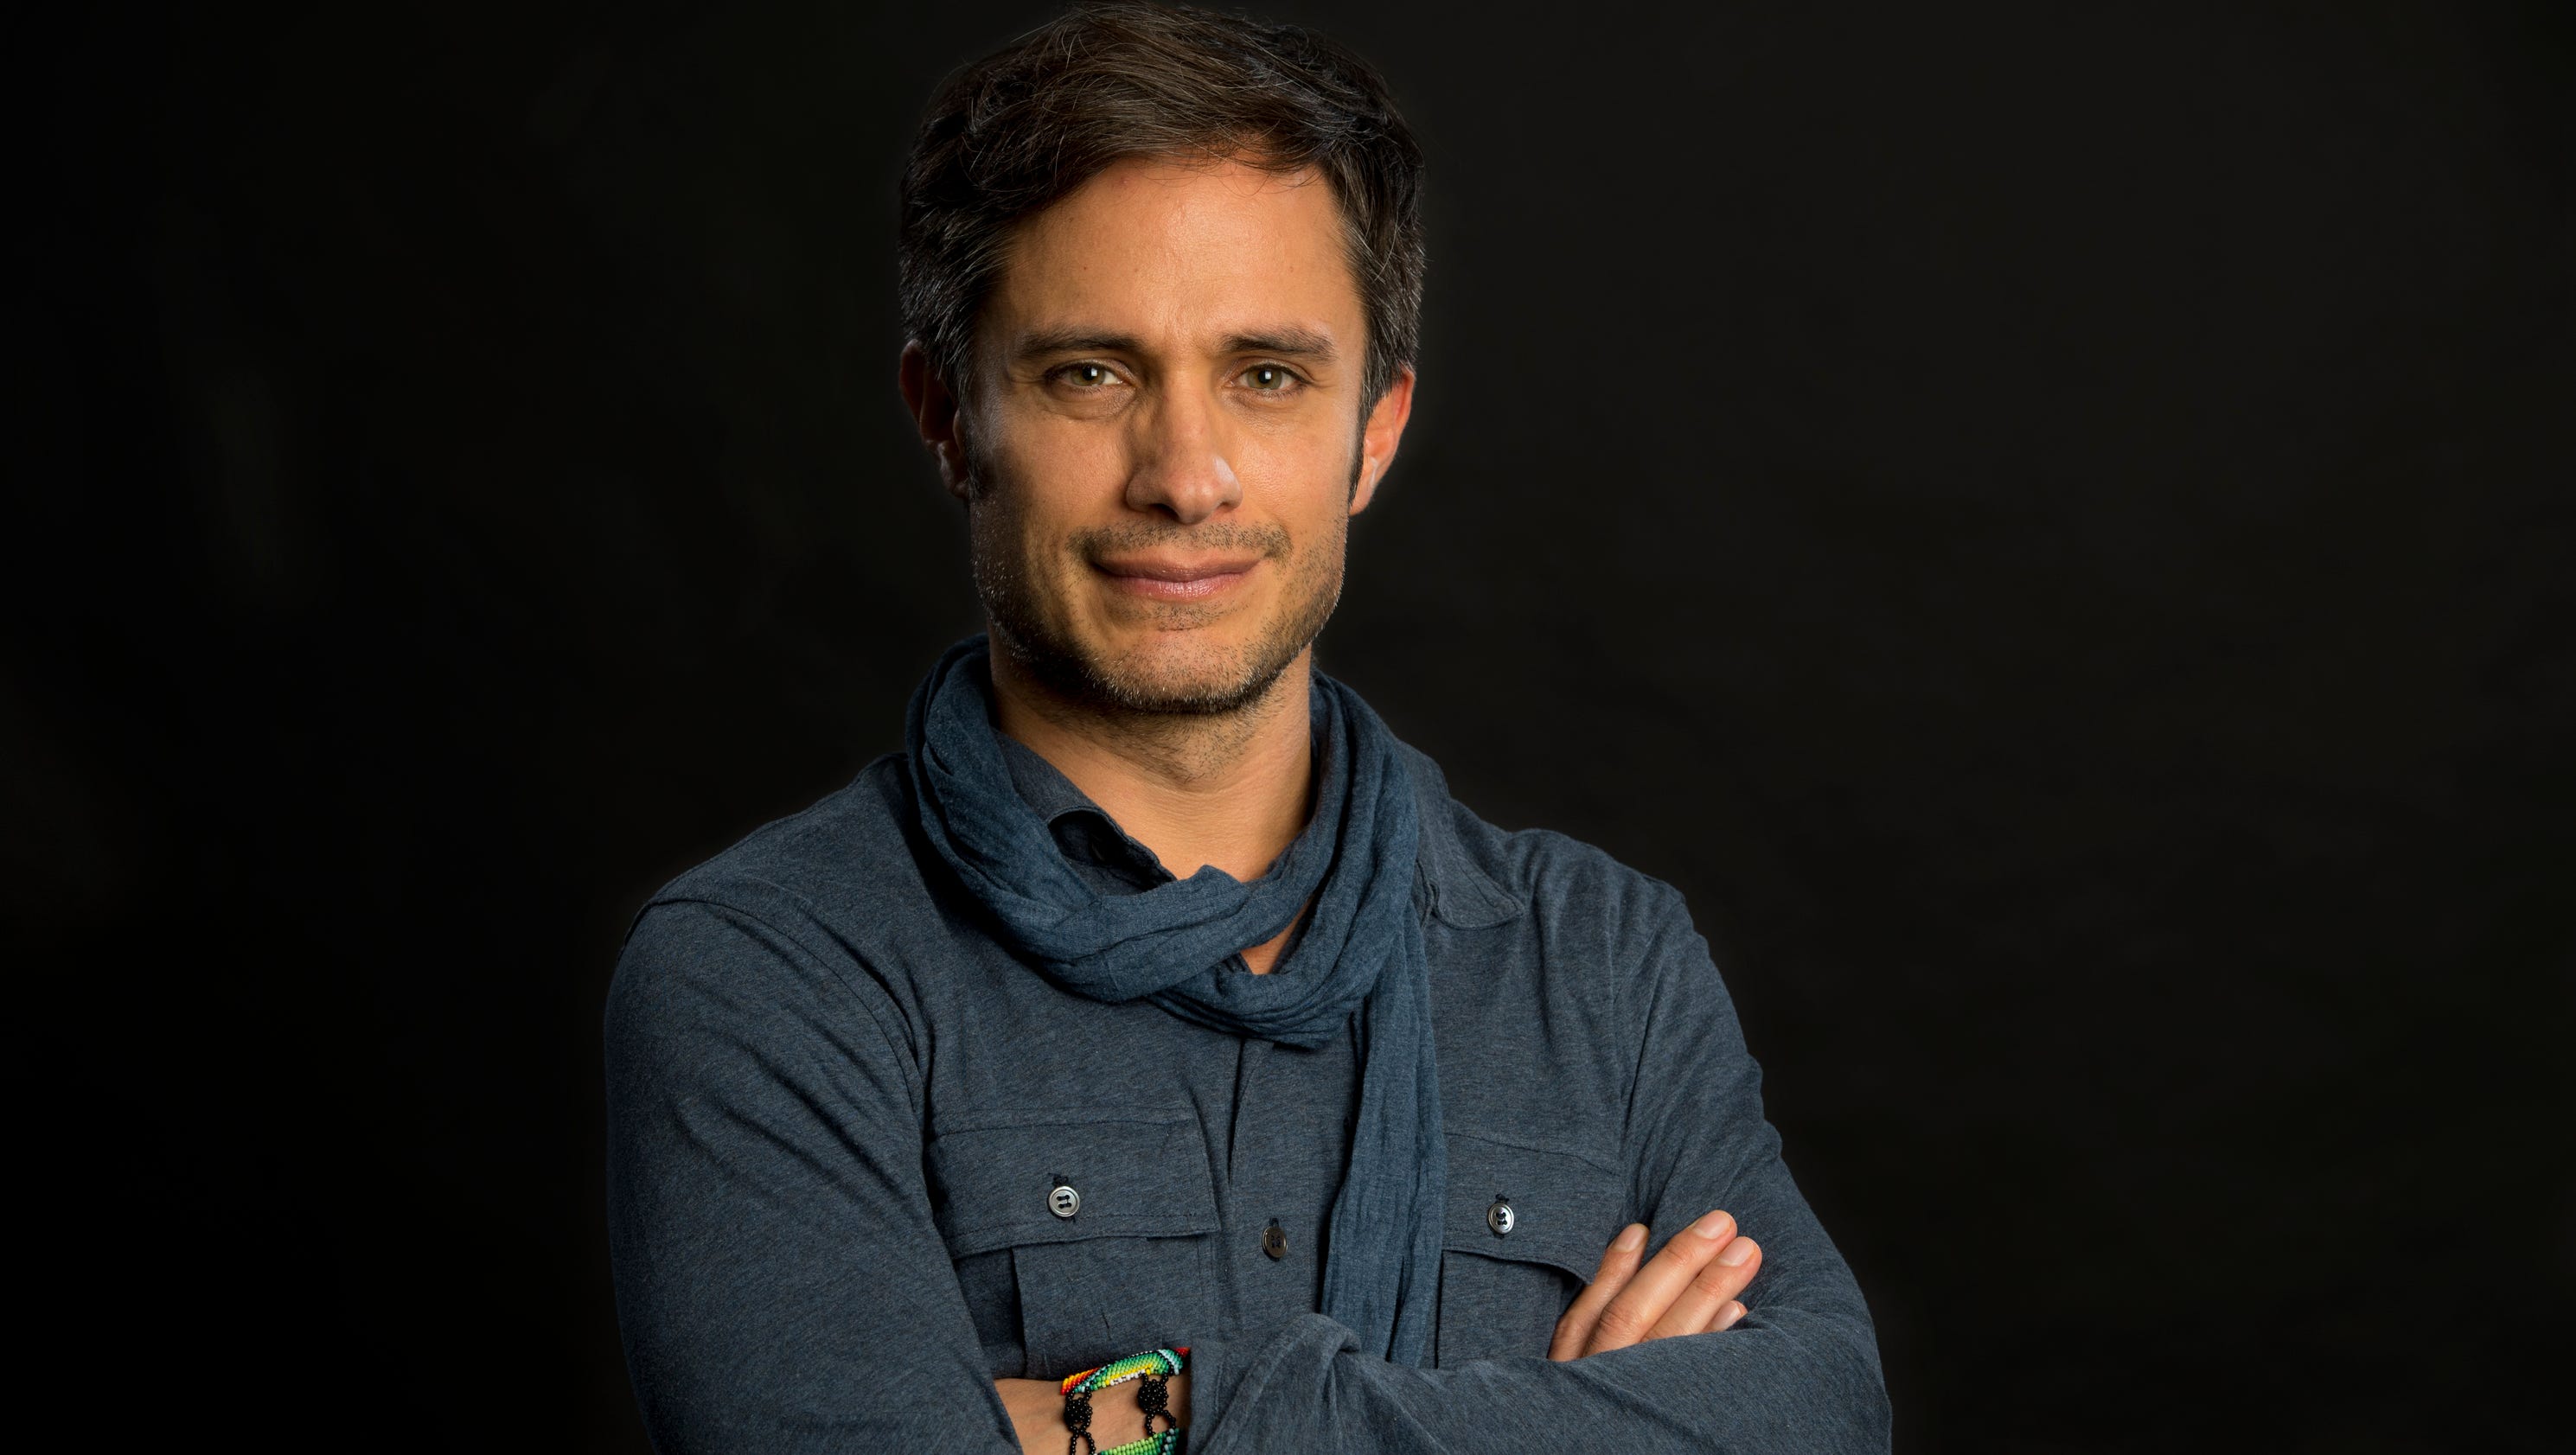 For Gael García Bernal, projects are 'always political'